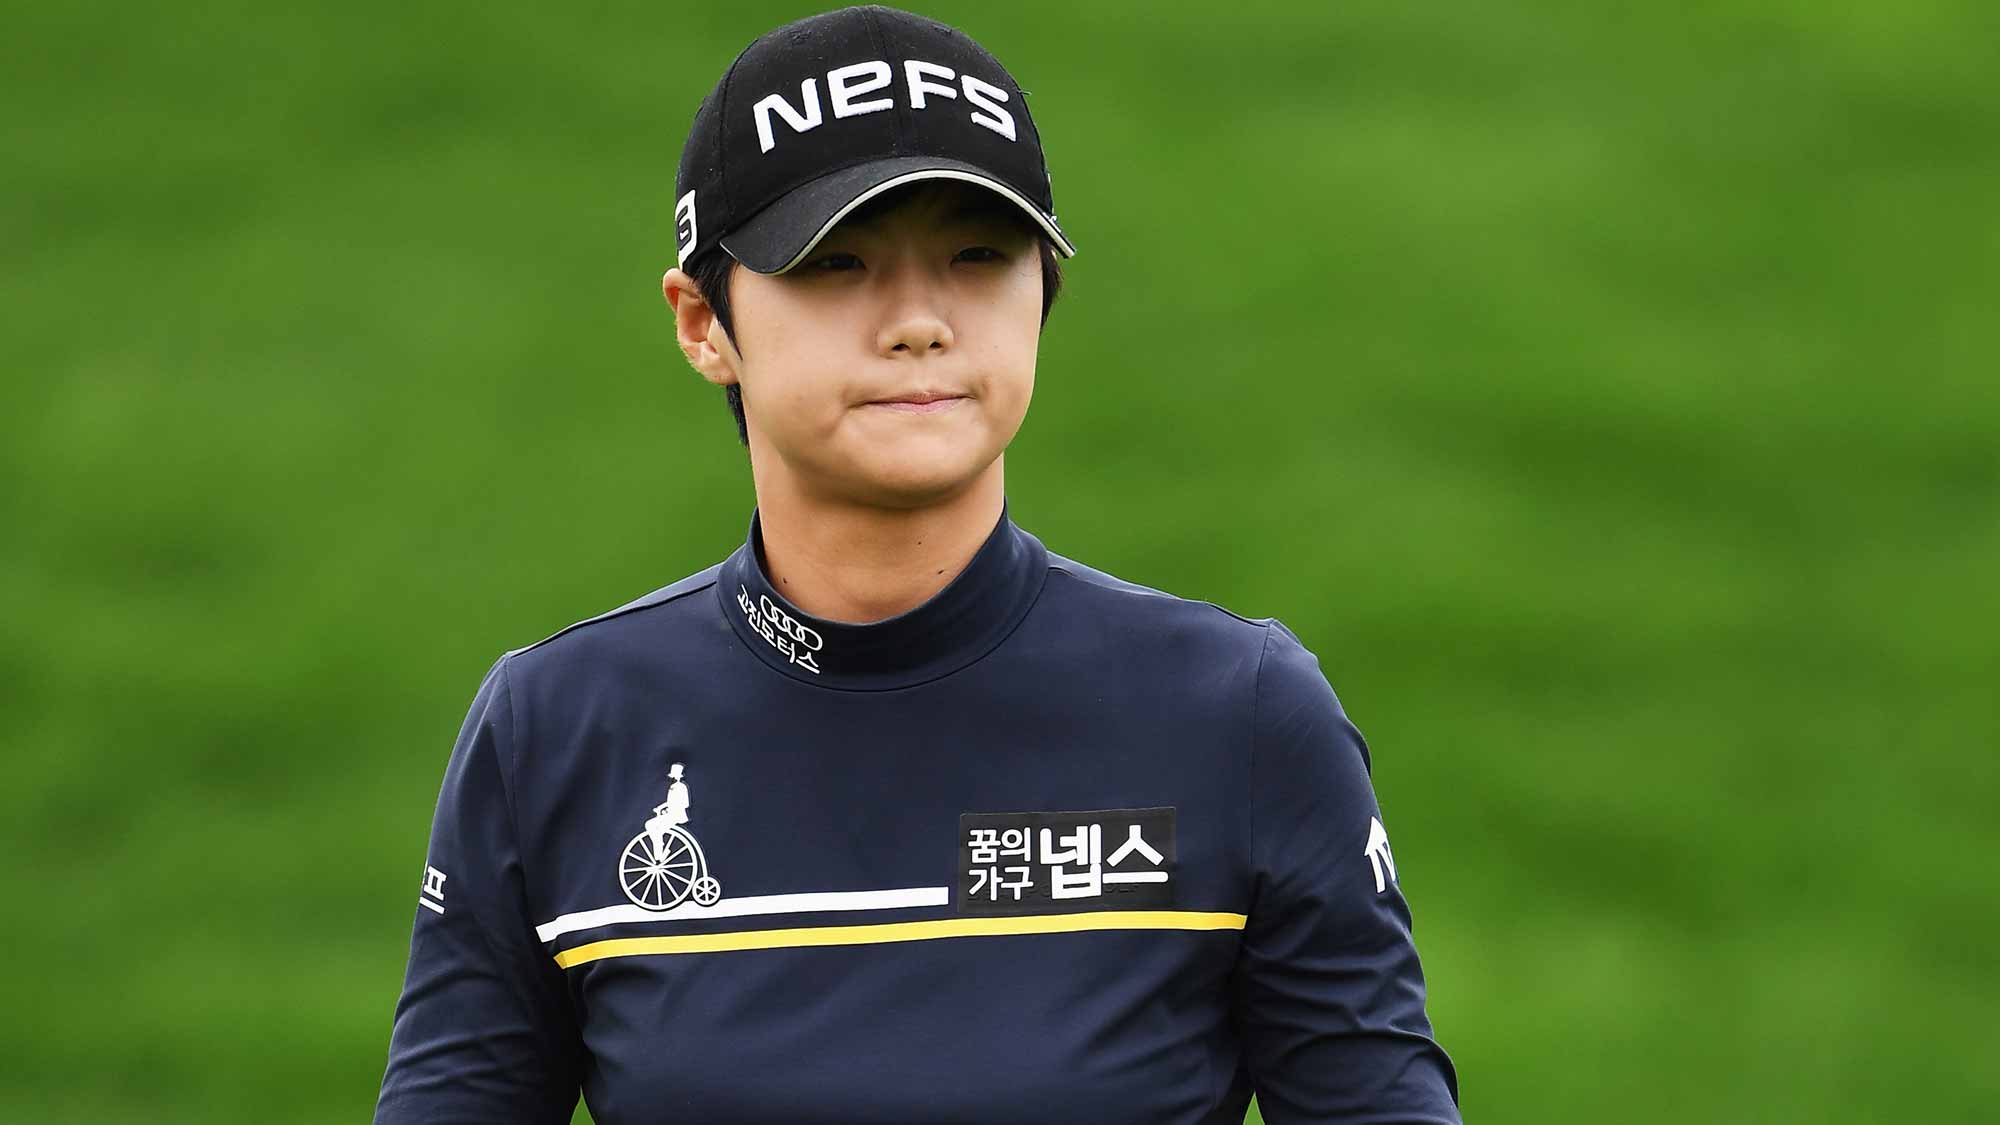 Sung Hyun Park of Korea reacts during the second round of The Evian Championship